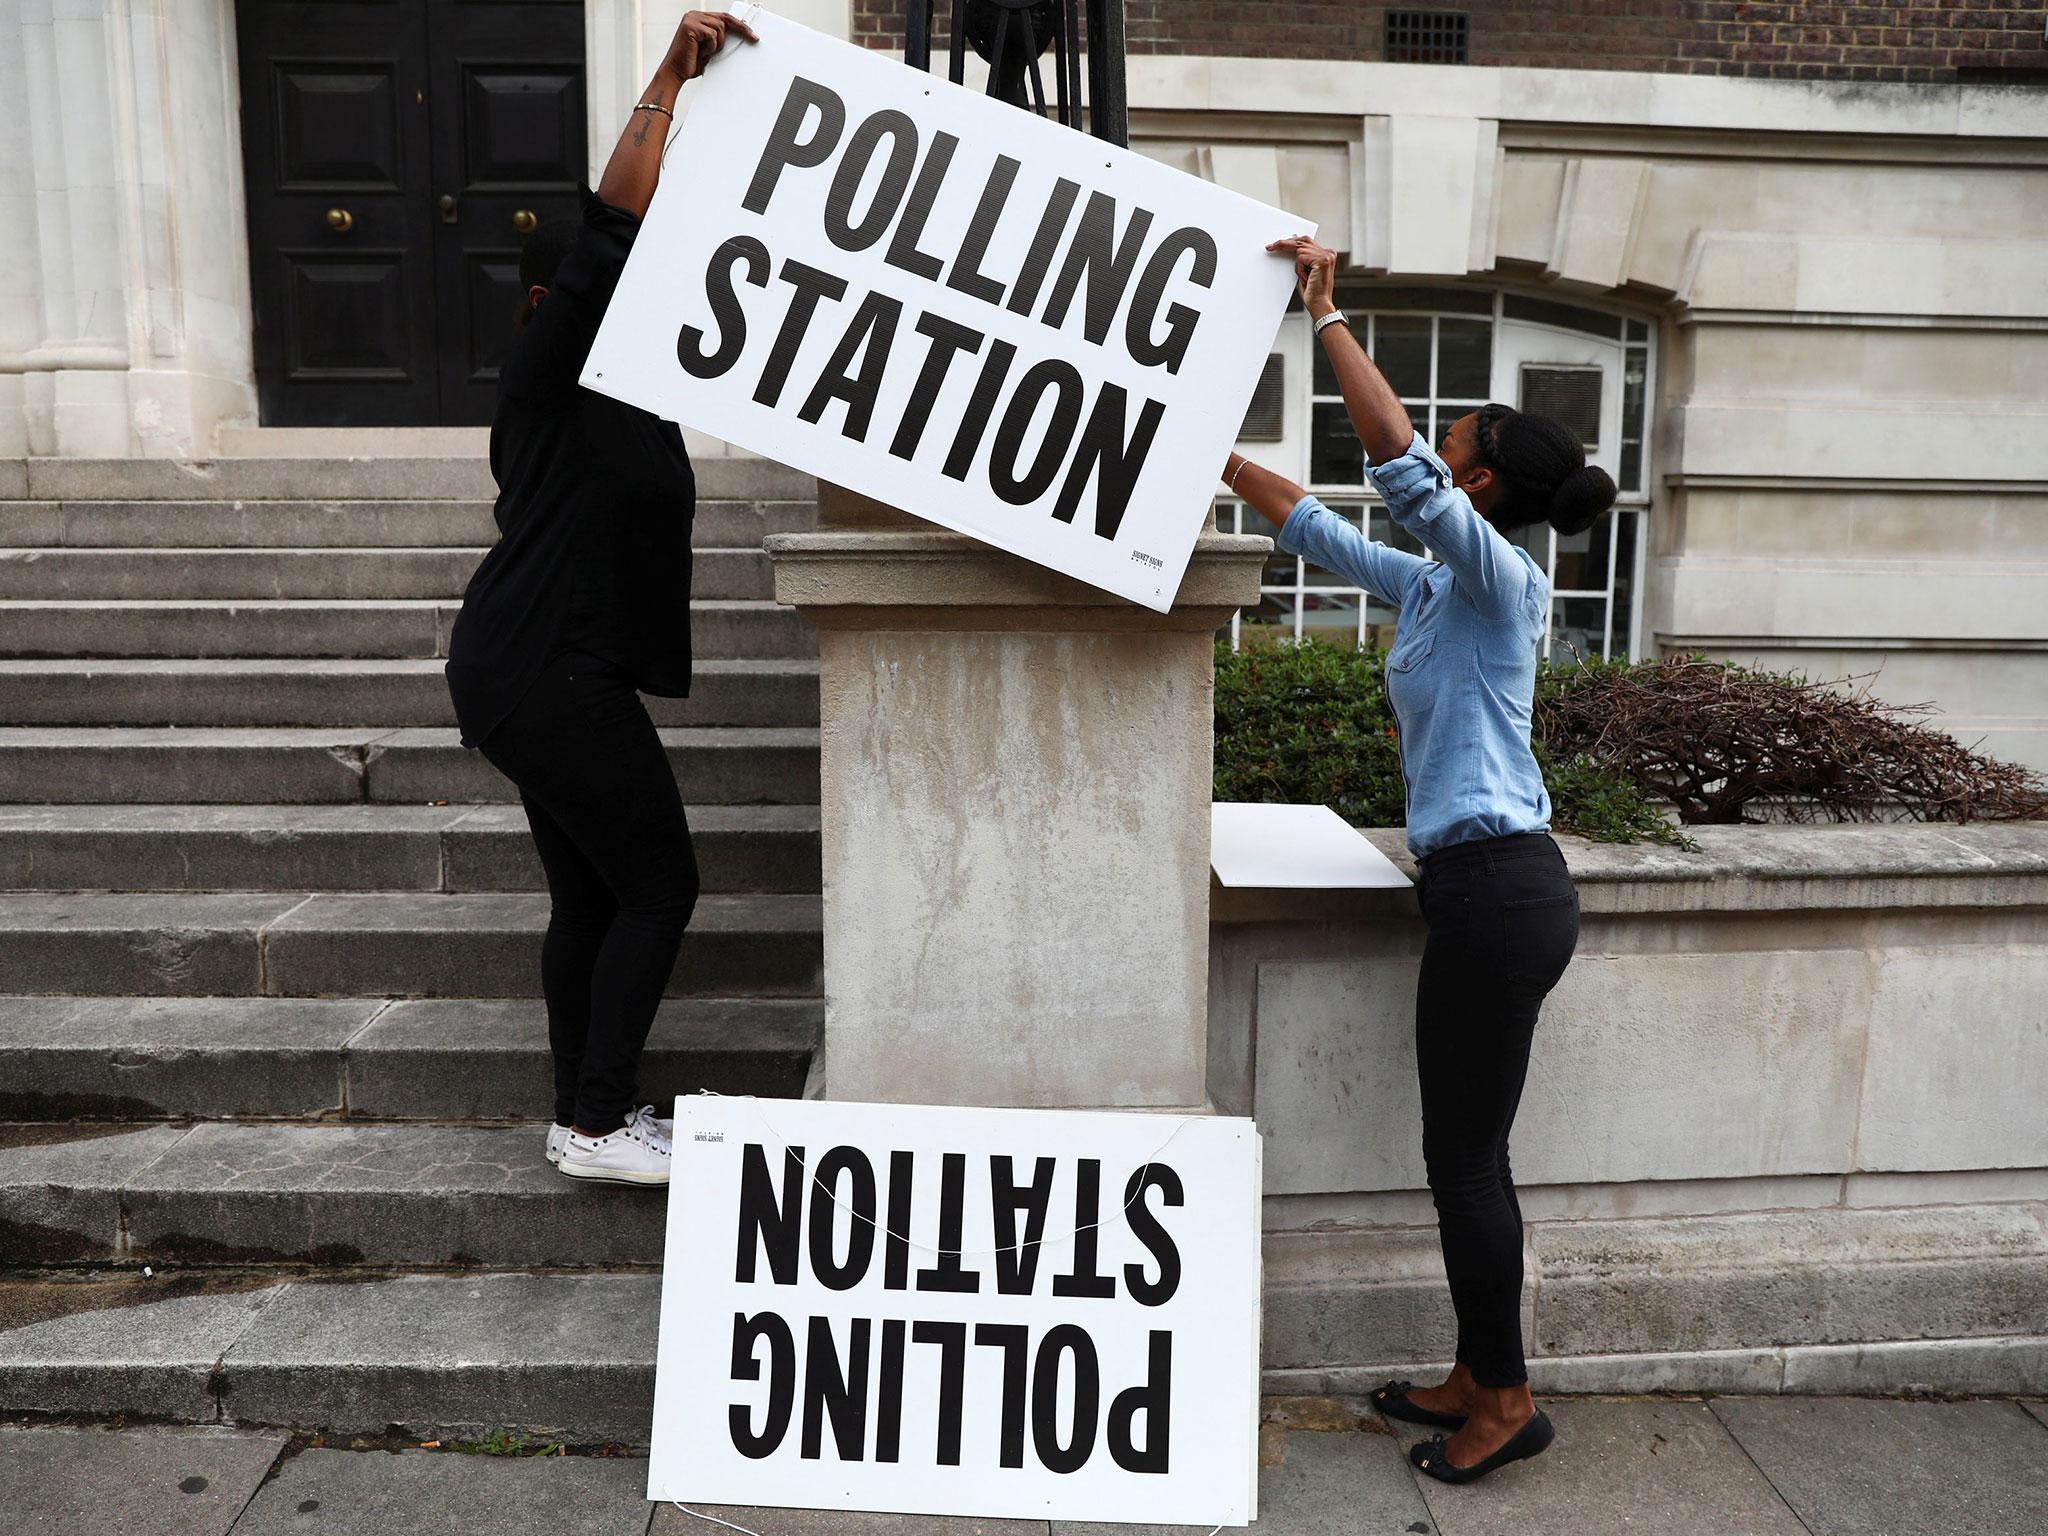 Workers prepare signs outside their polling station on general election day in London on 8 June 2017